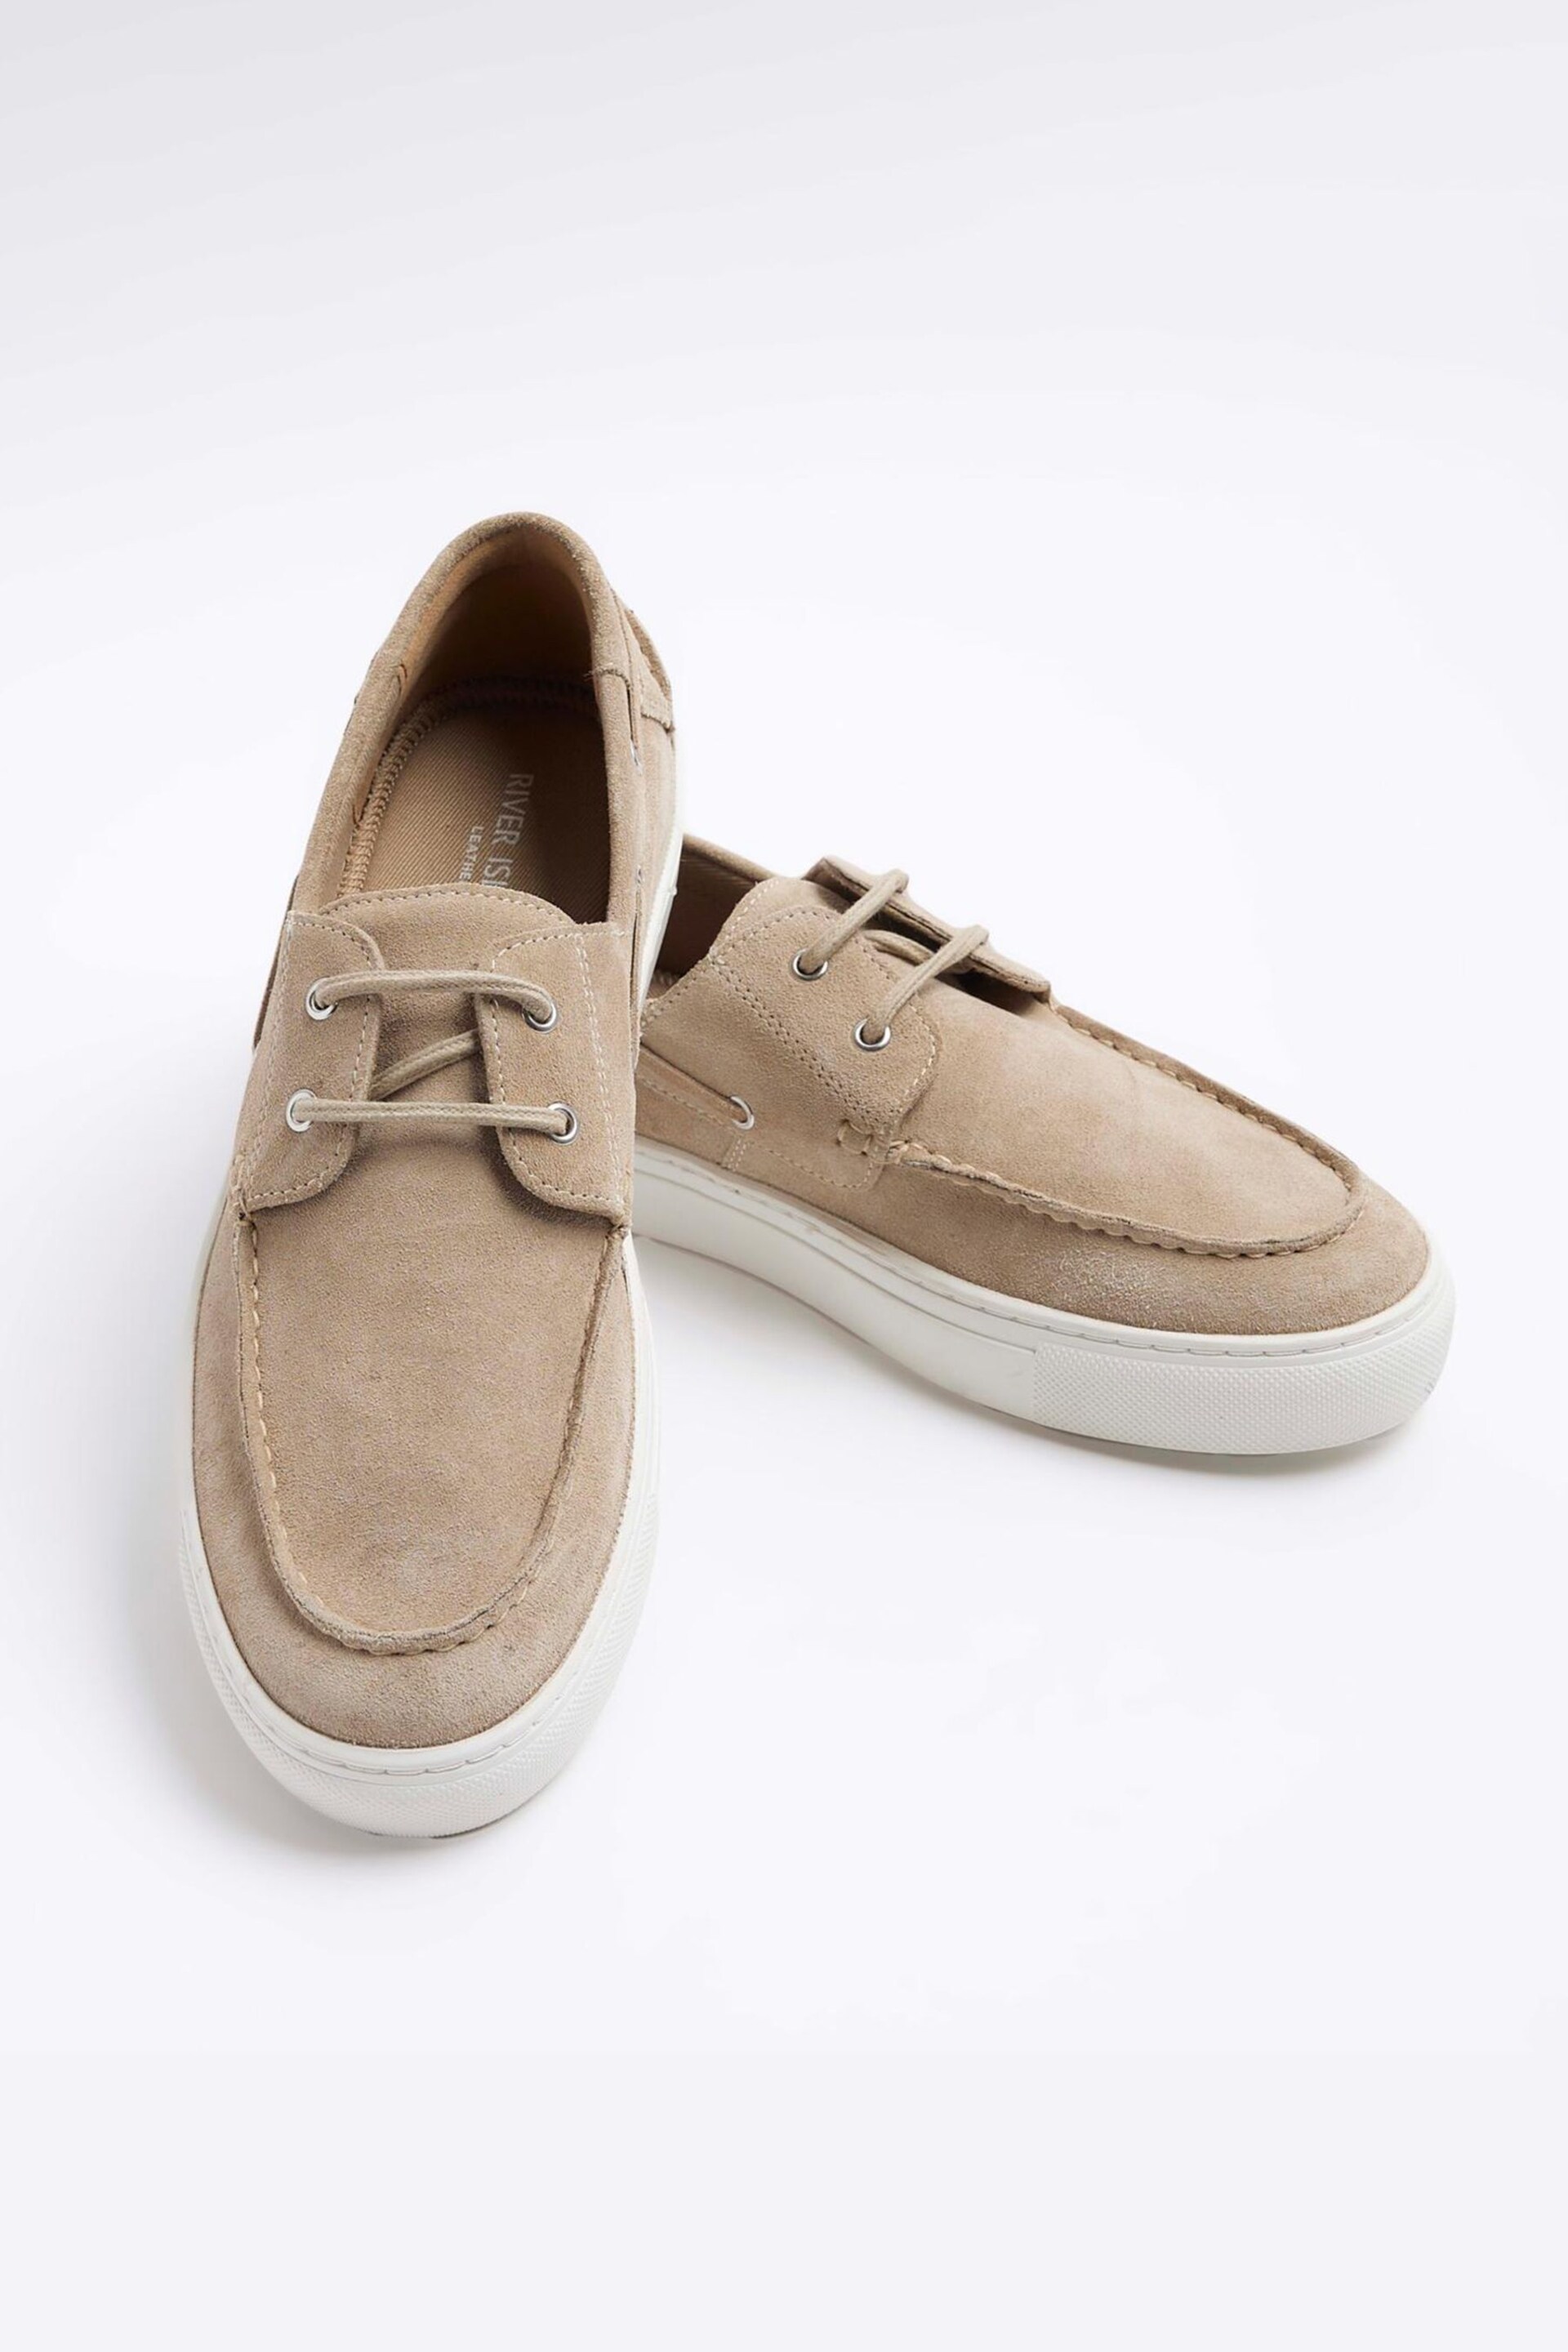 River Island Brown Suede Boat Shoes - Image 3 of 4